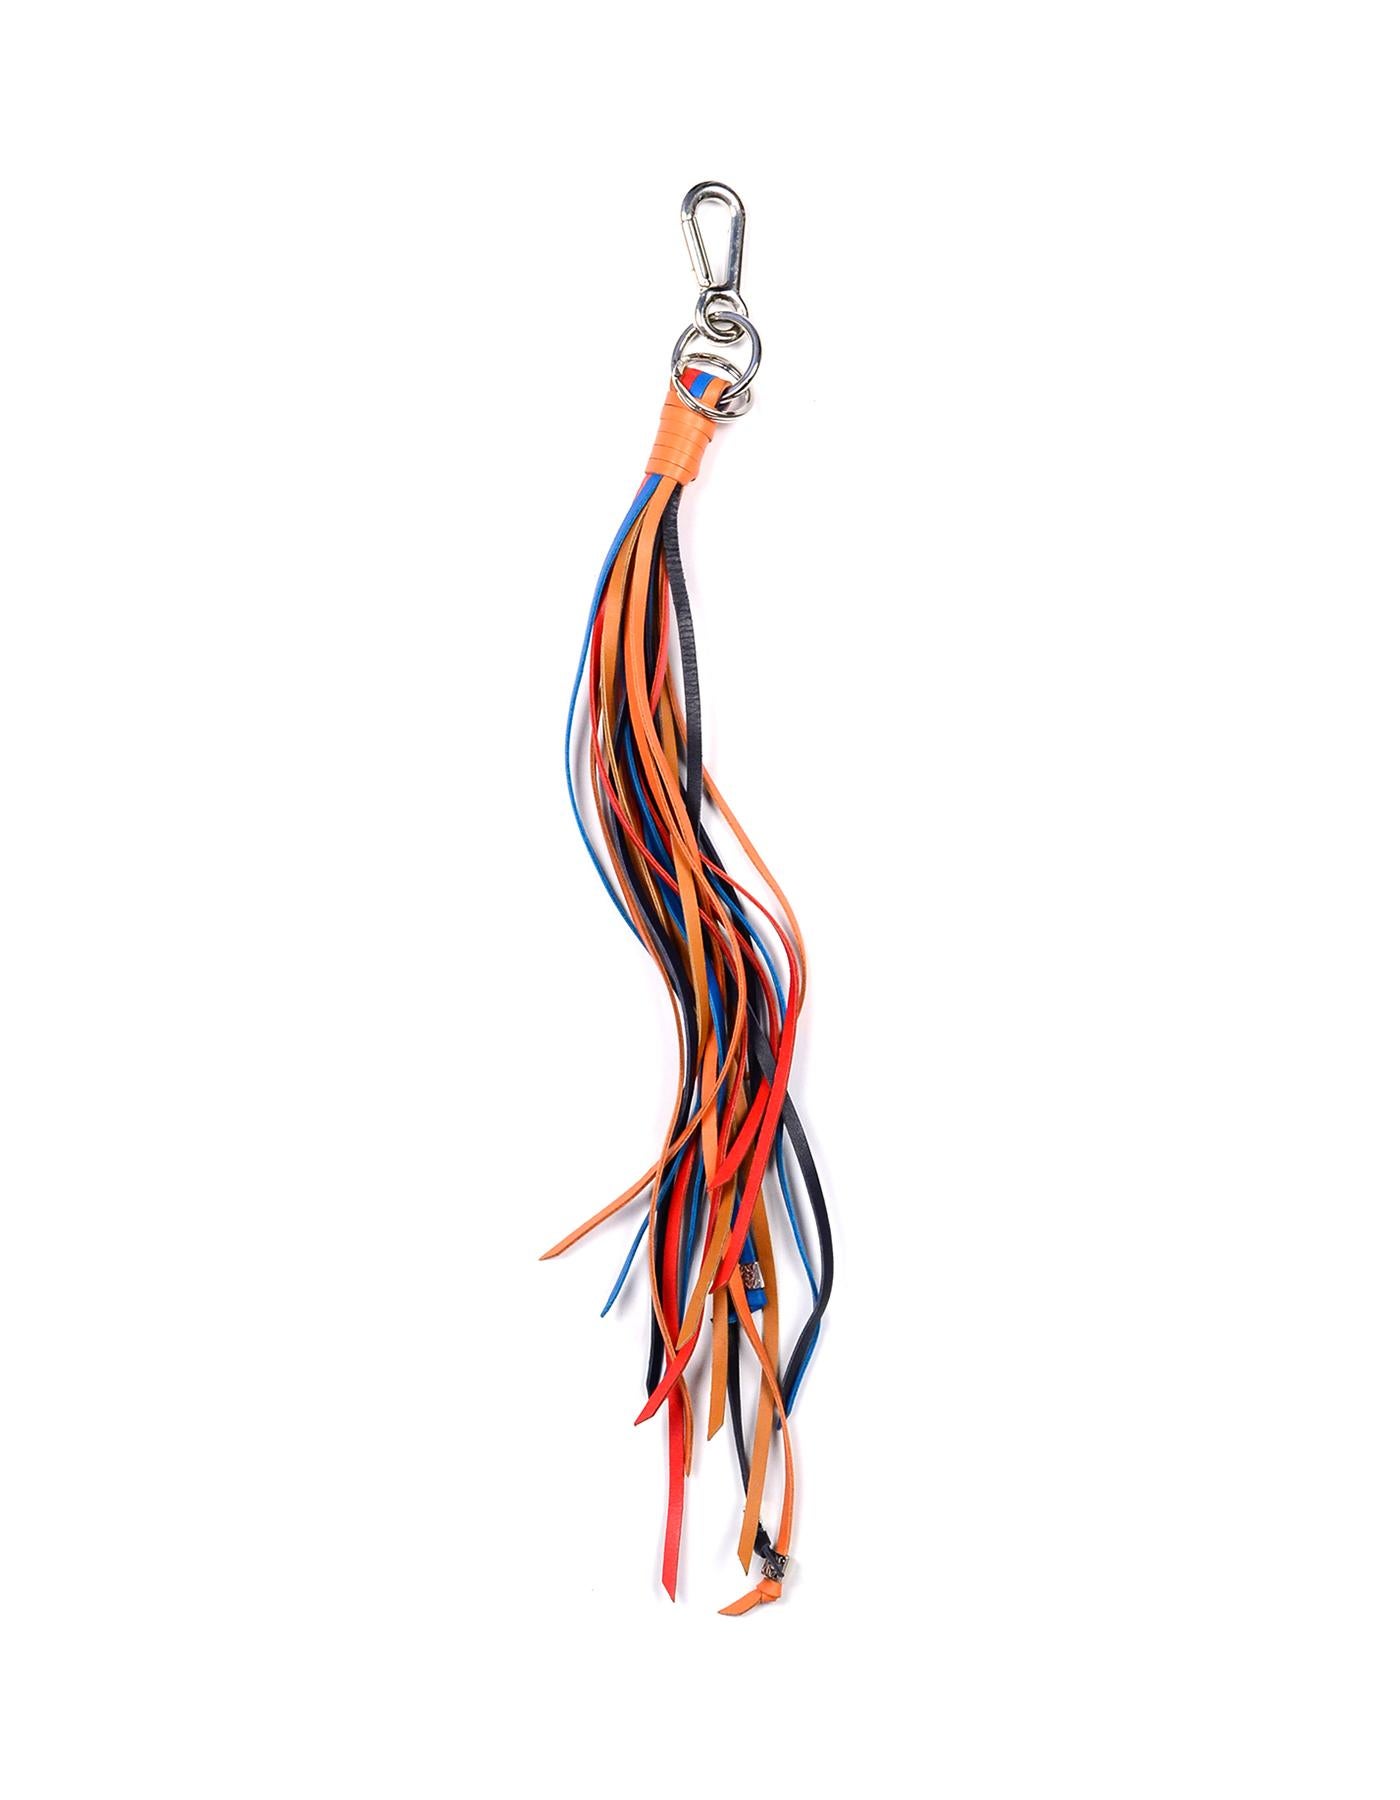 Loewe Multicolor Fringe Leather Bag Charm rt $490
Color:Multicolor
Materials: Metal, leather
Closure: Lobster clasp
Stamp: Loewe
Overall Condition: Excellent pre-owned condition
Estimated retail: 490 + tax
Measurements:
Pendant: 15